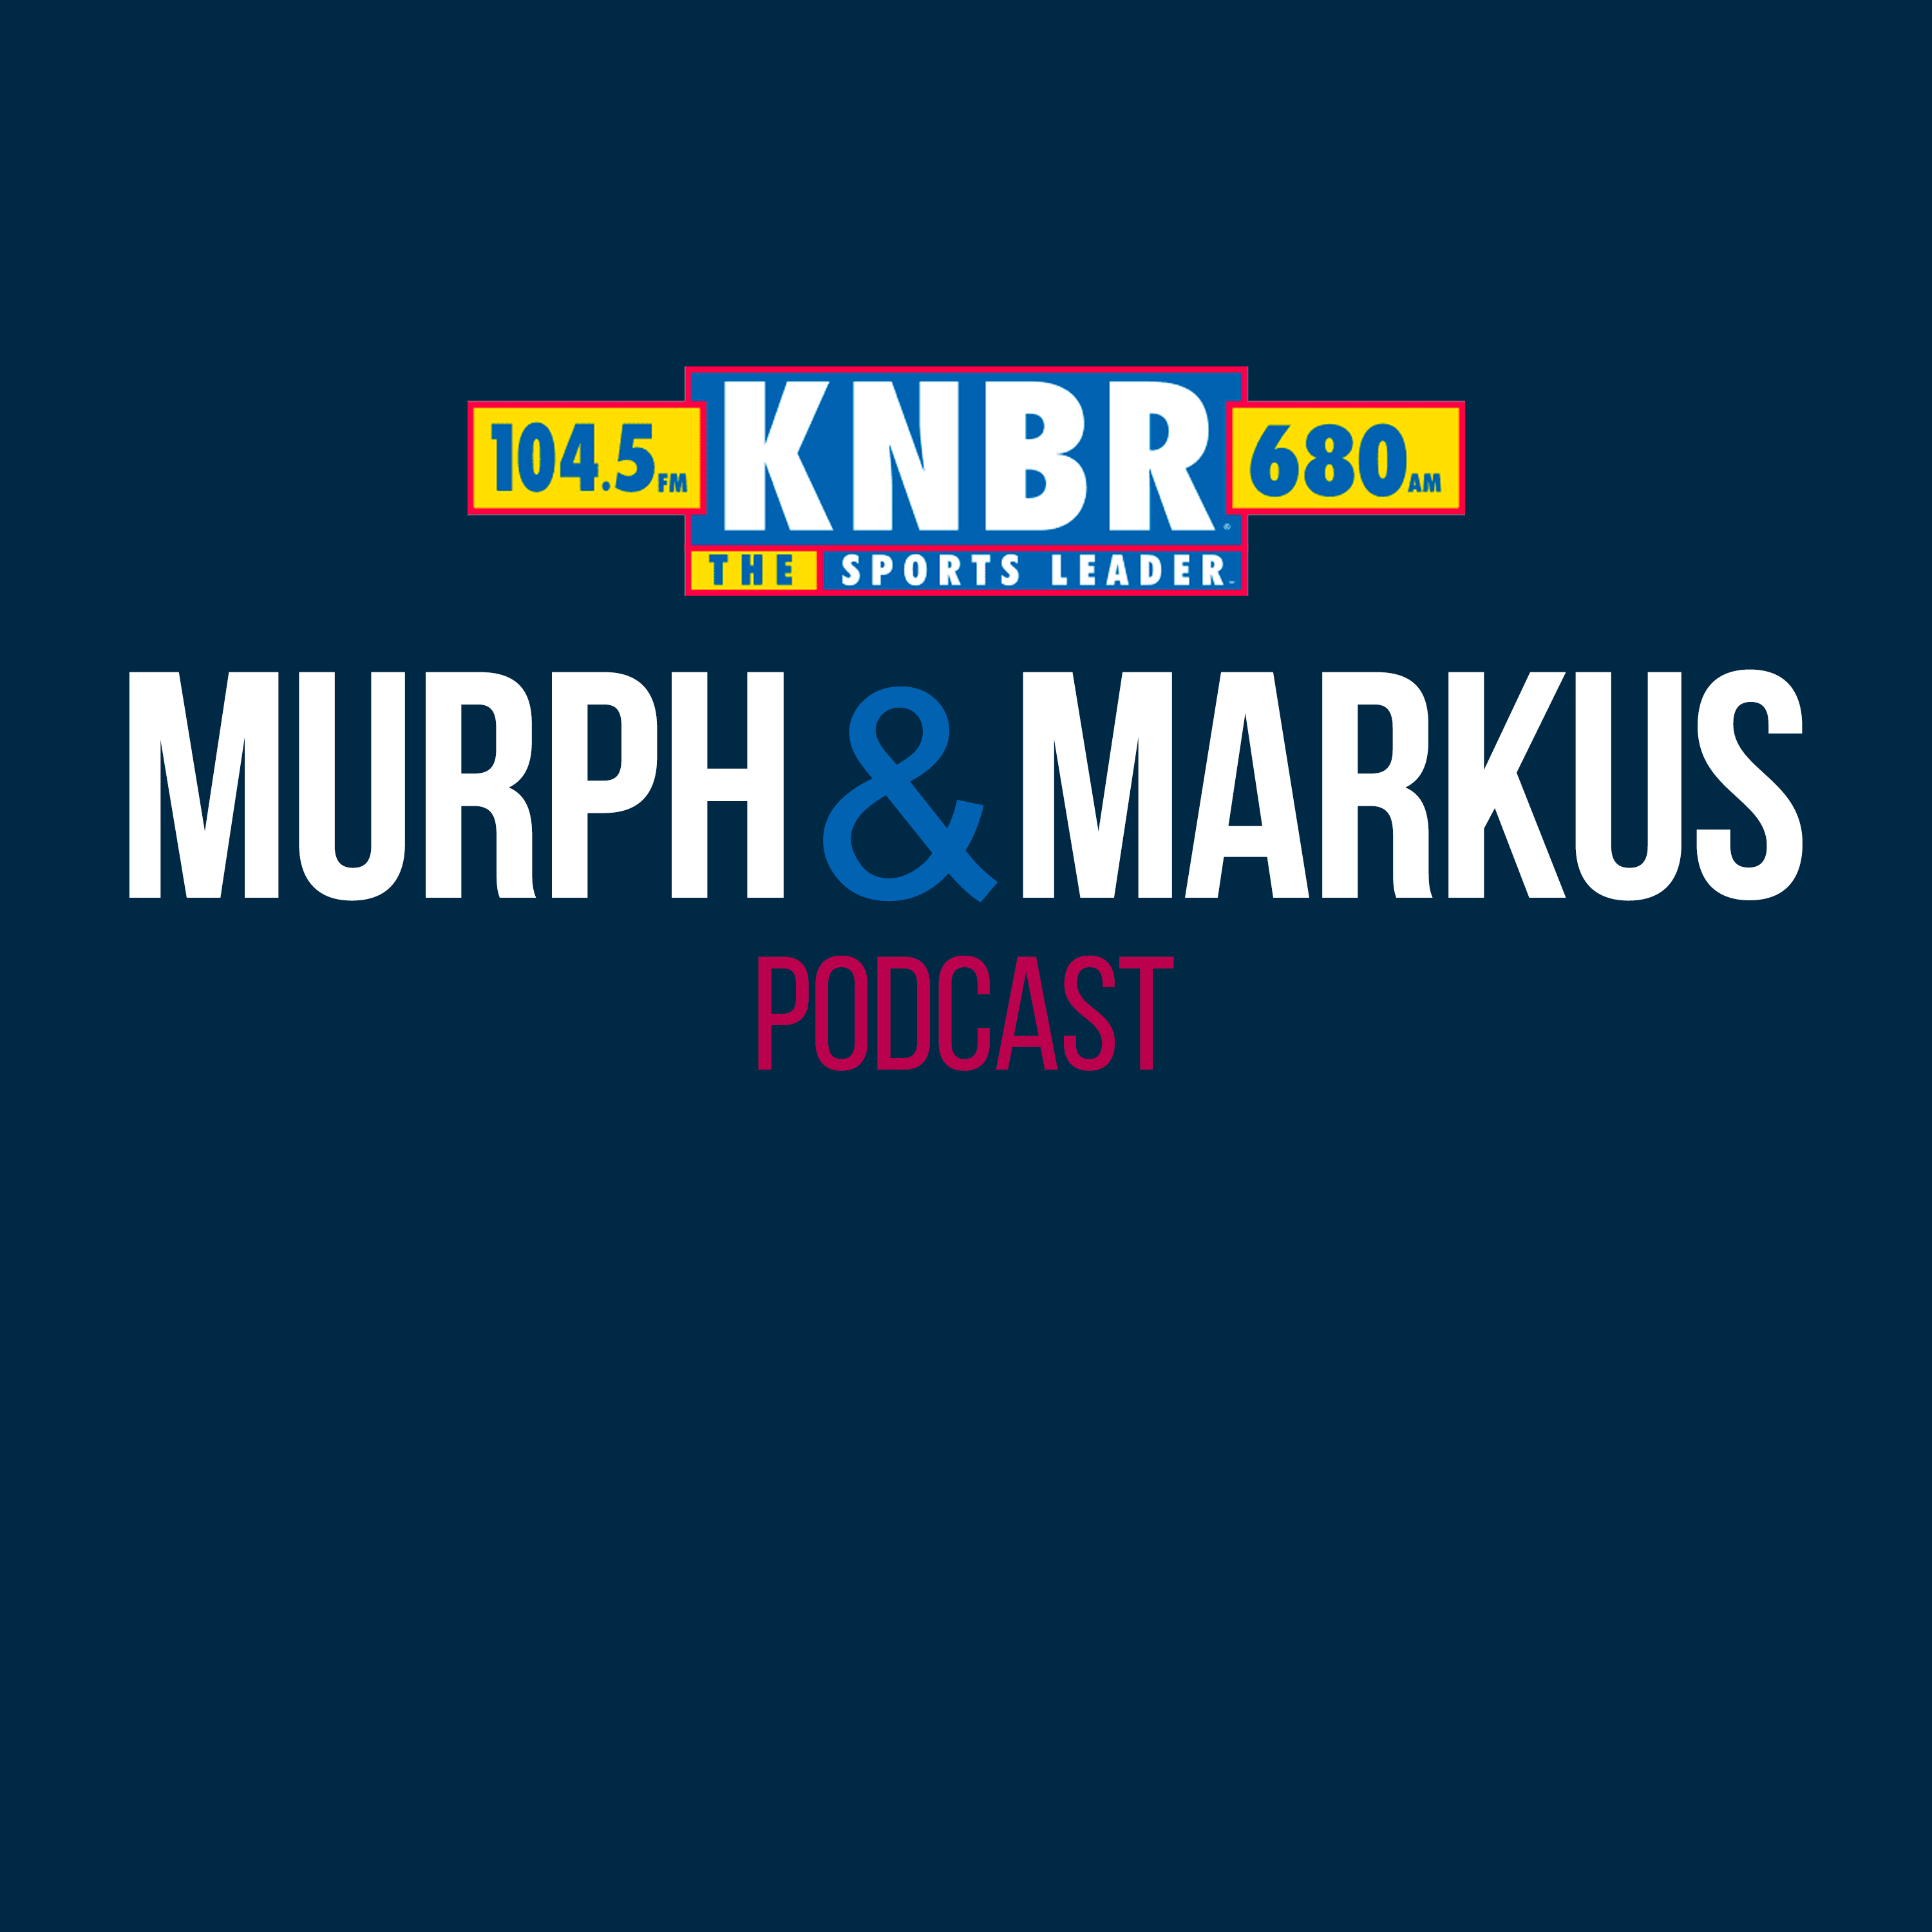 2-22 Austin Slater joins Murph & Markus to discuss being the longest tenured Giant in the clubhouse and how he has been a mentor to the young players